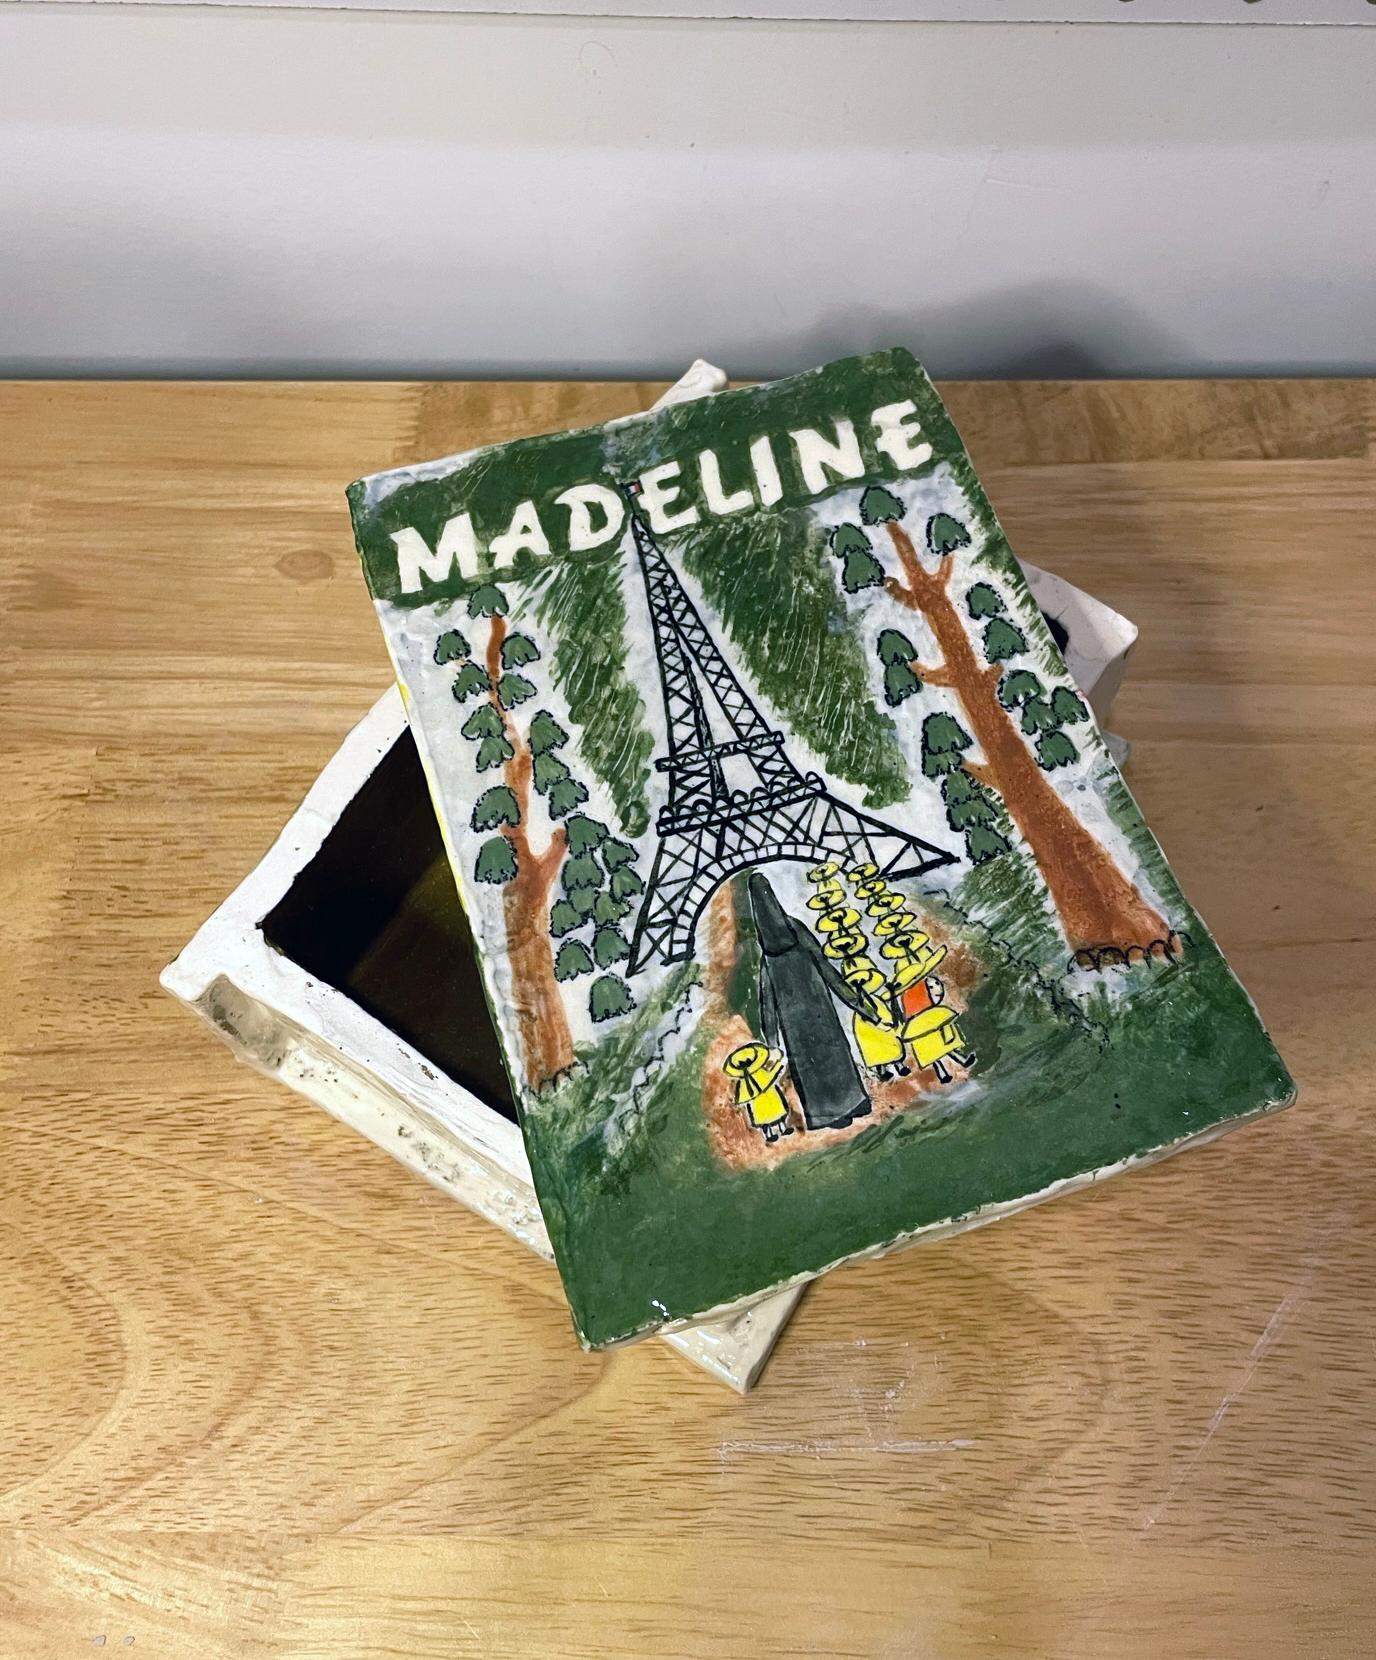 Modern Madeline Book Box For Sale